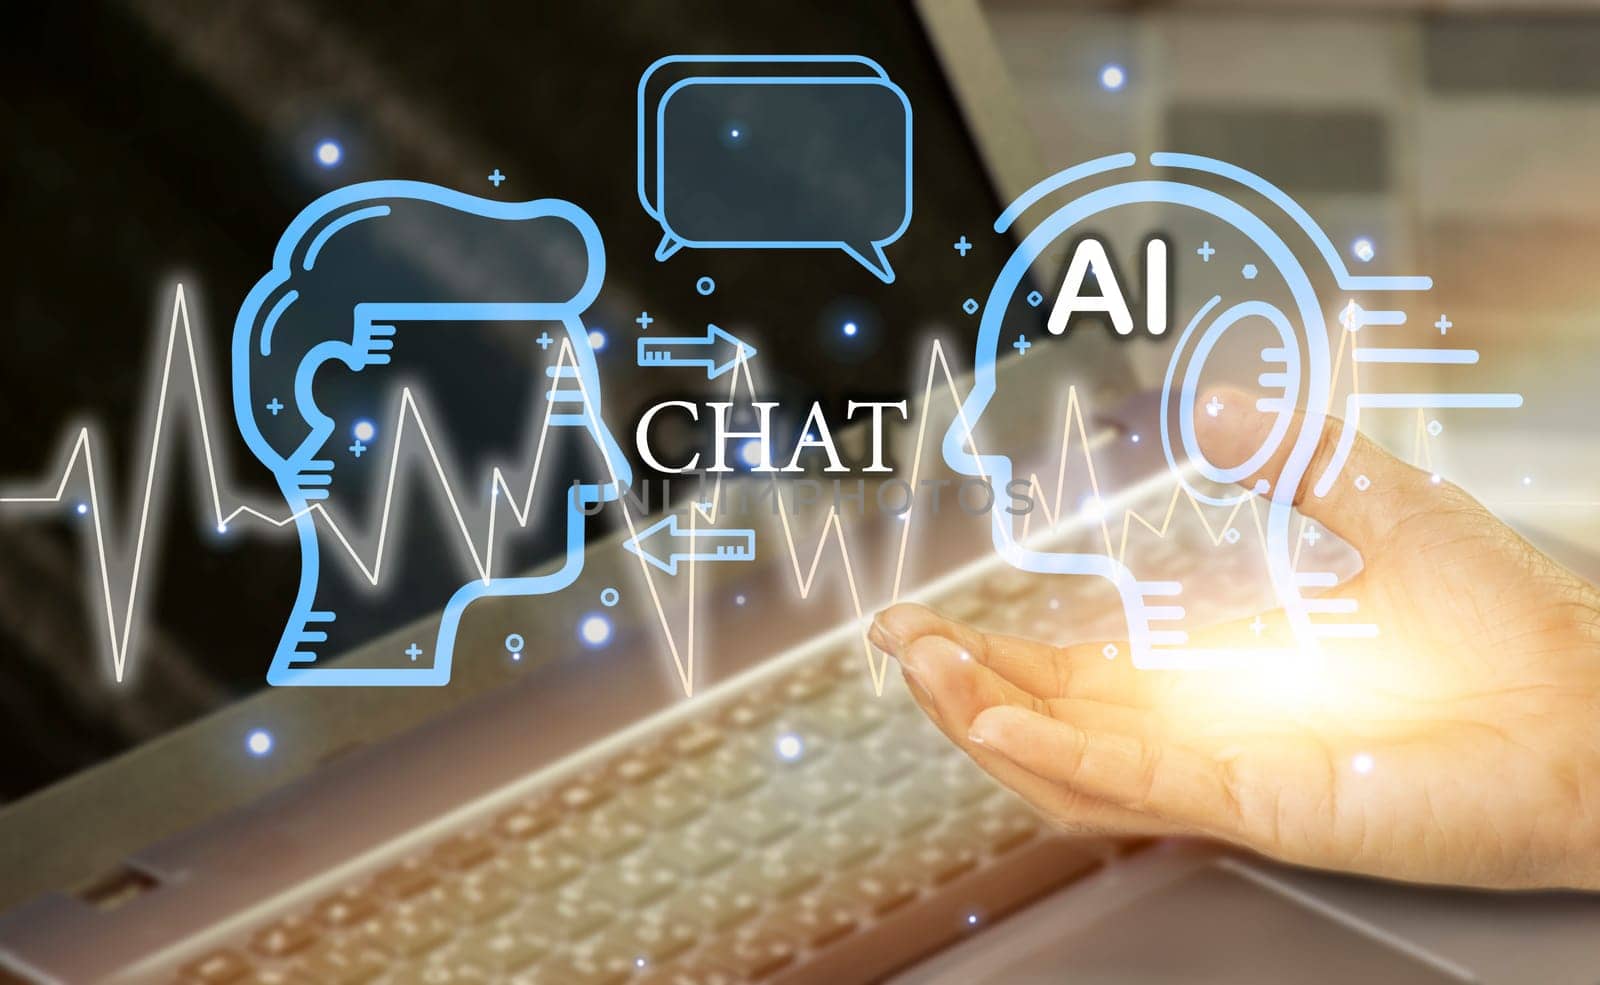 Hand touch Digital chatbot to access data and information in online network. Robot Applications and Global Connectivity AI Artificial Intelligence innovation and technology